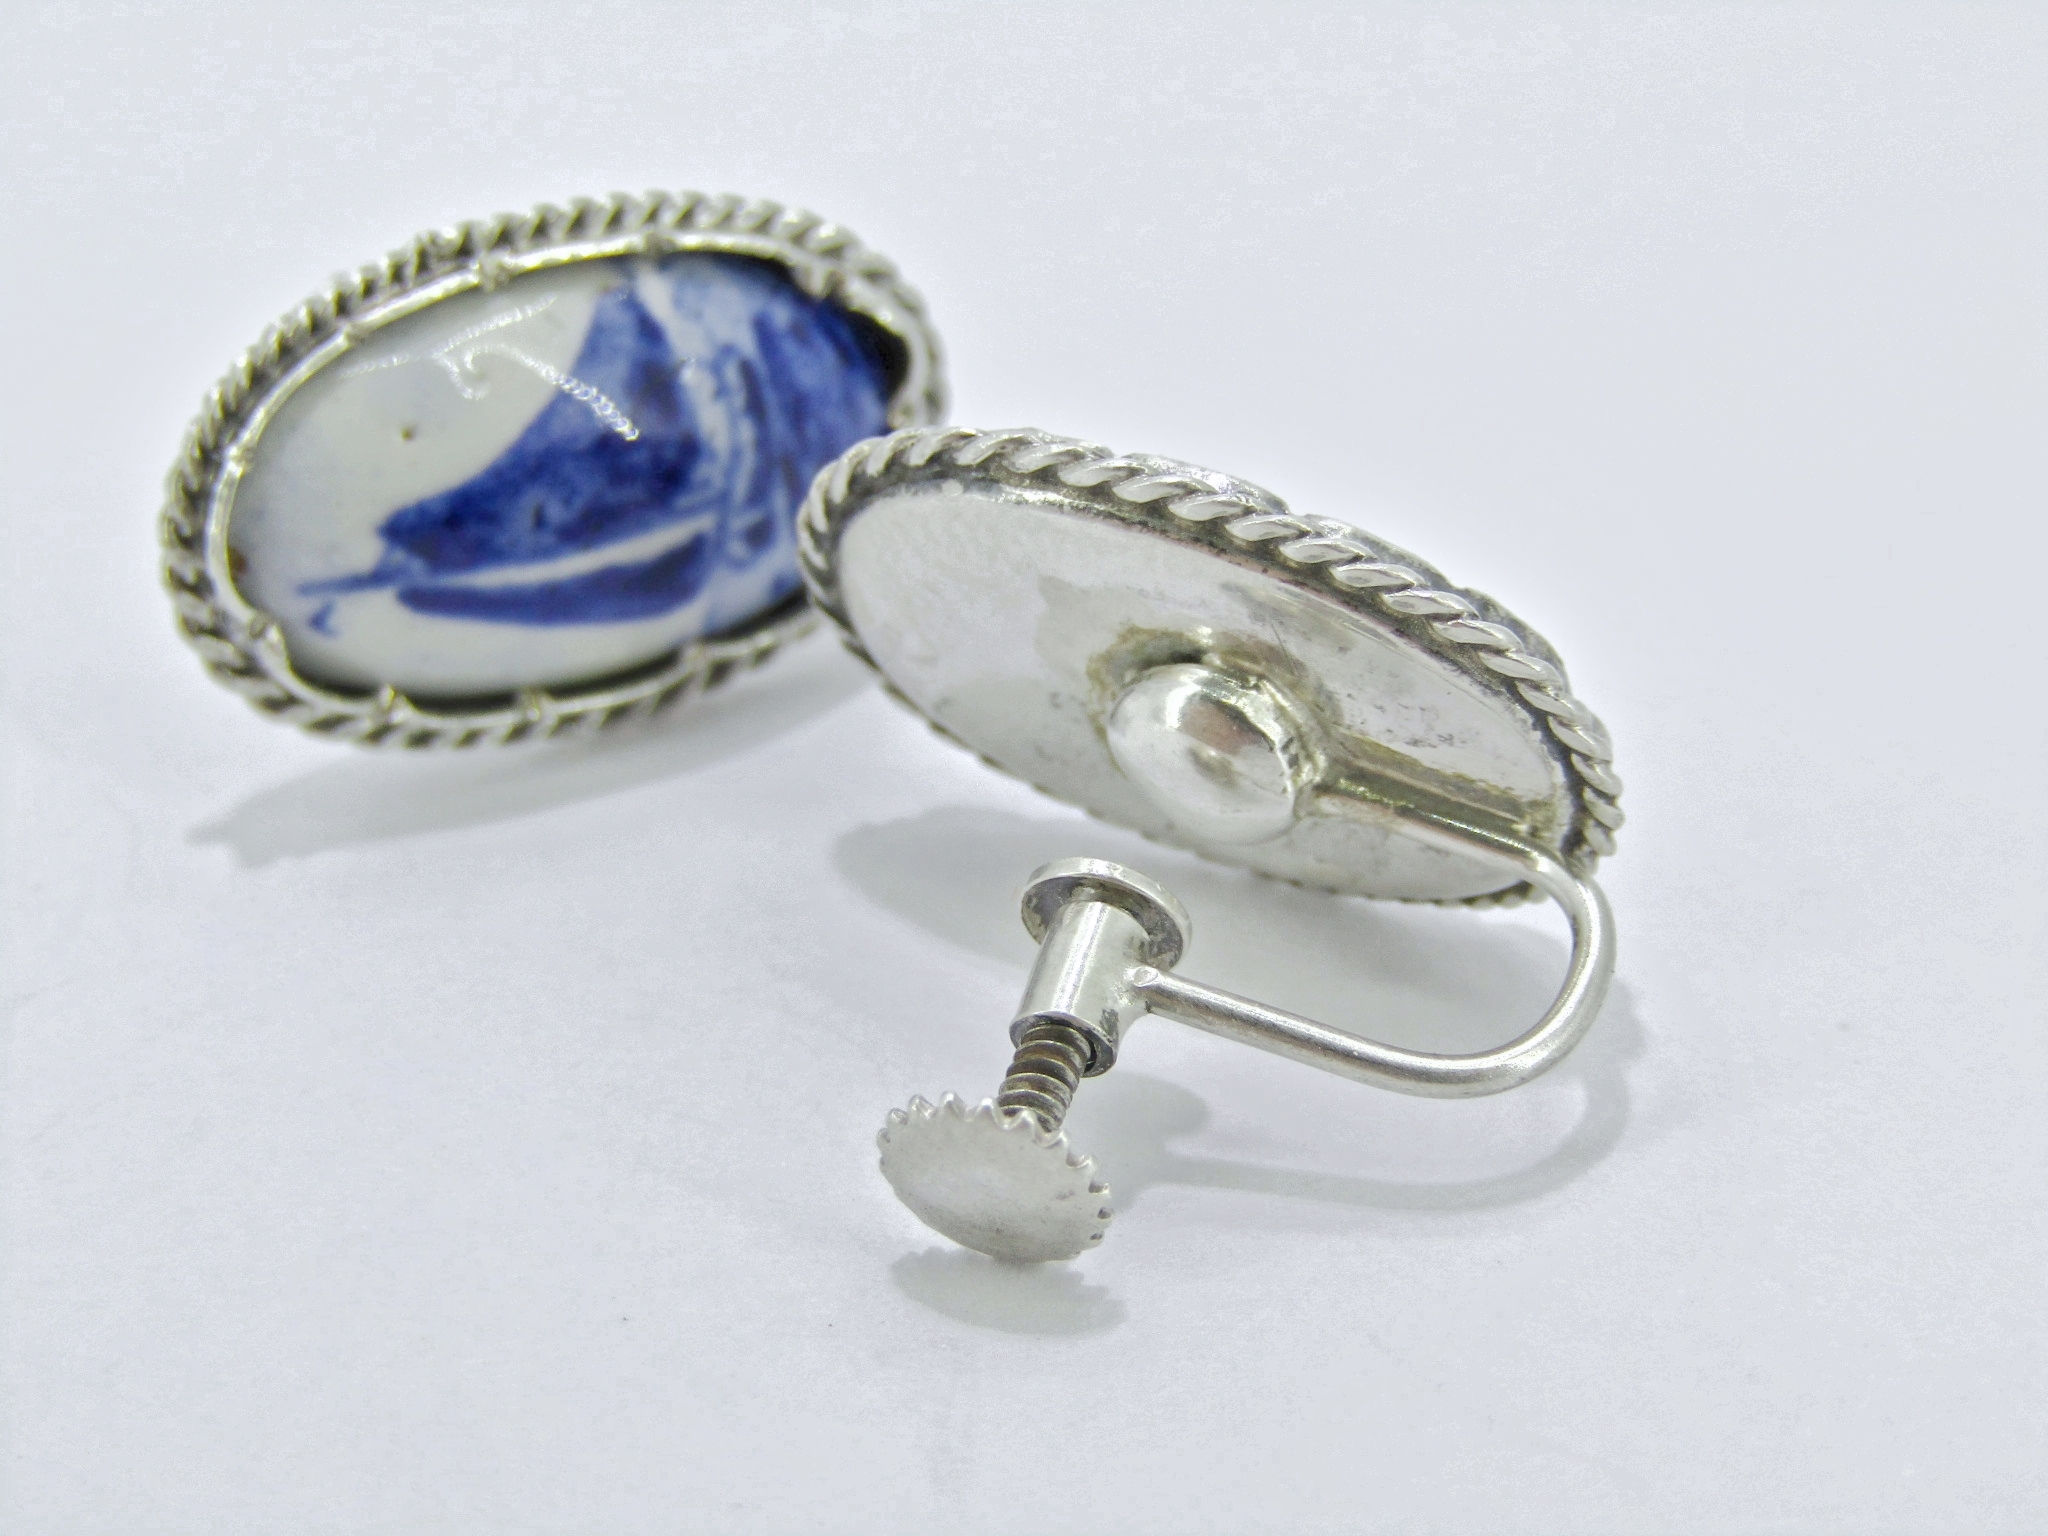 A Gorgeous Pair of Vintage Delft Screw Back Earrings in Sterling Silver